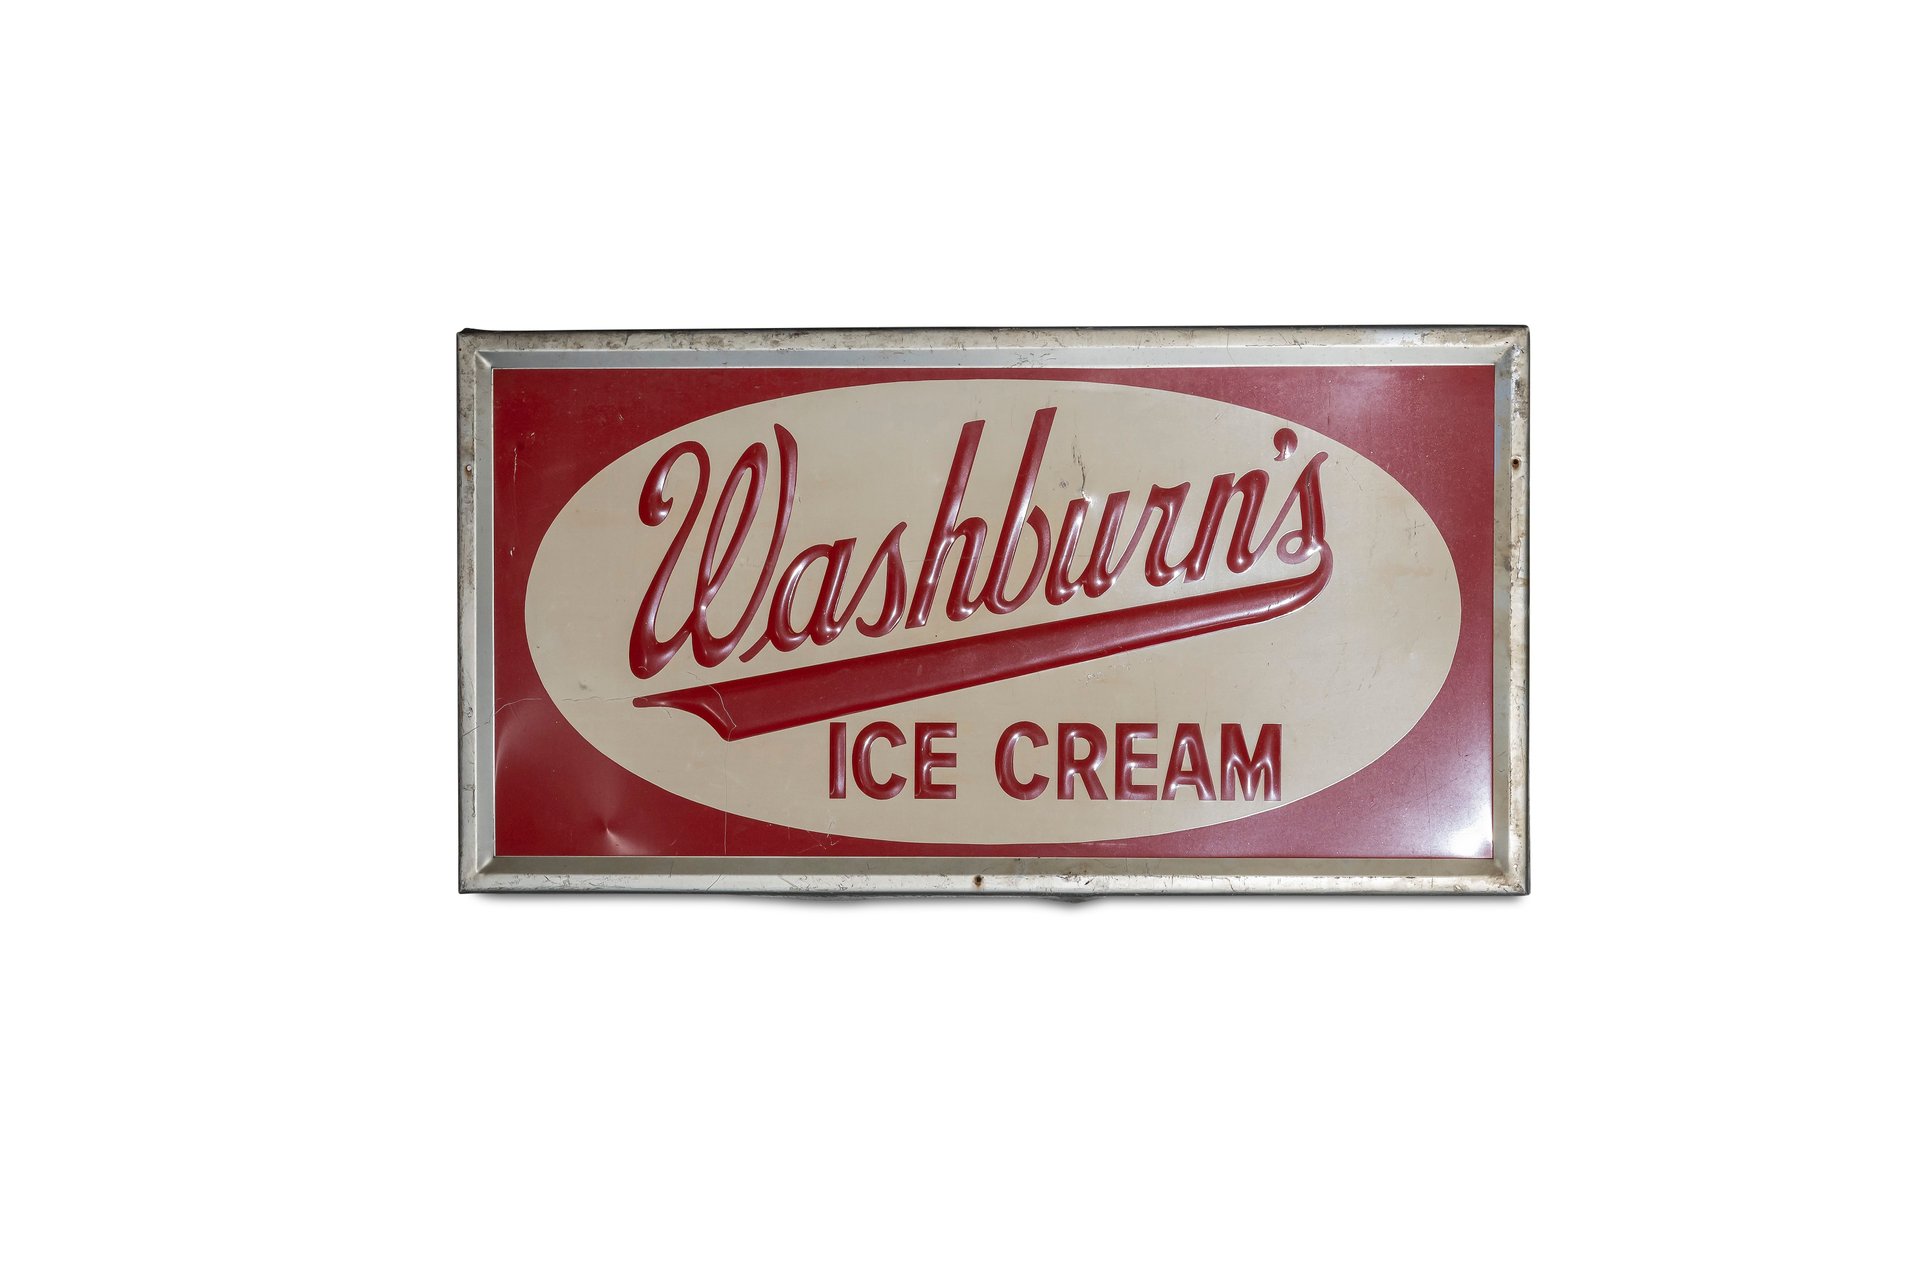 For Sale 'Washburn's Ice Cream' Metal Sign